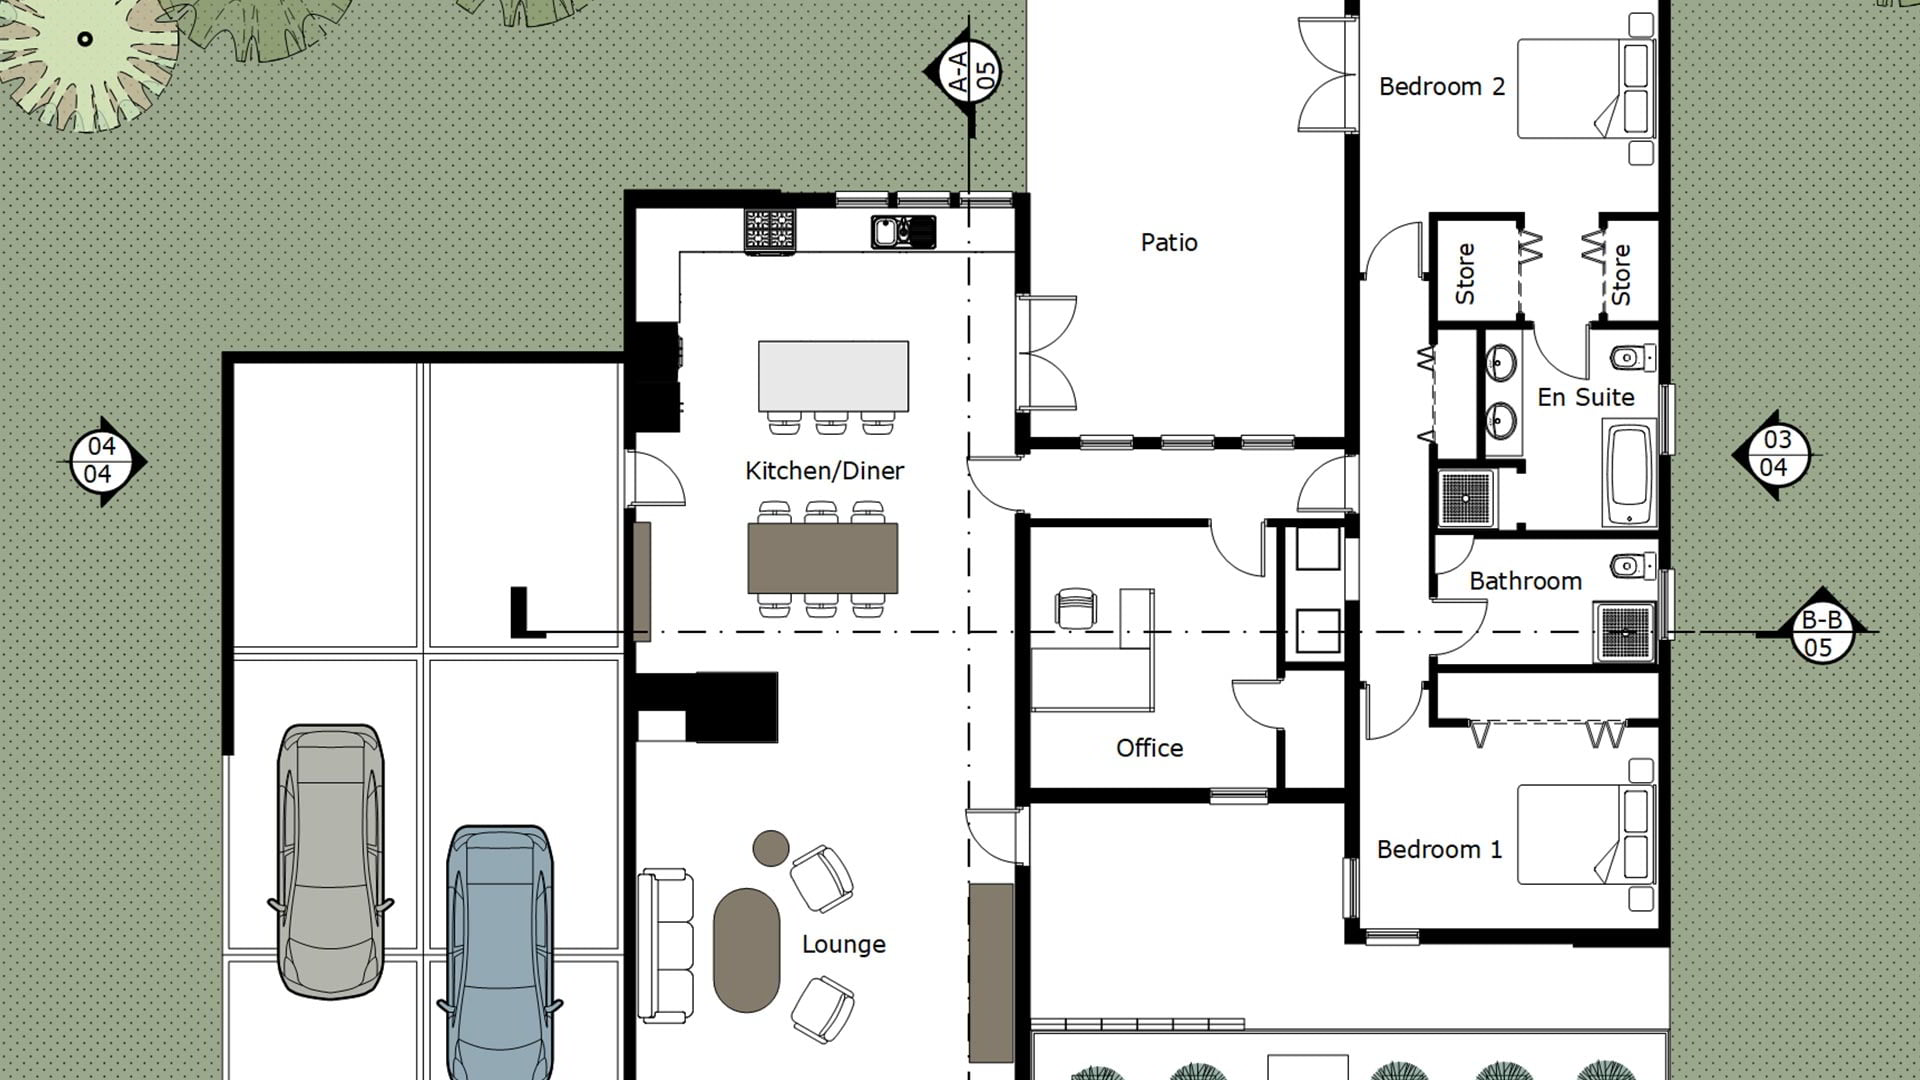 SketchUp for Architecture: LayOut free download